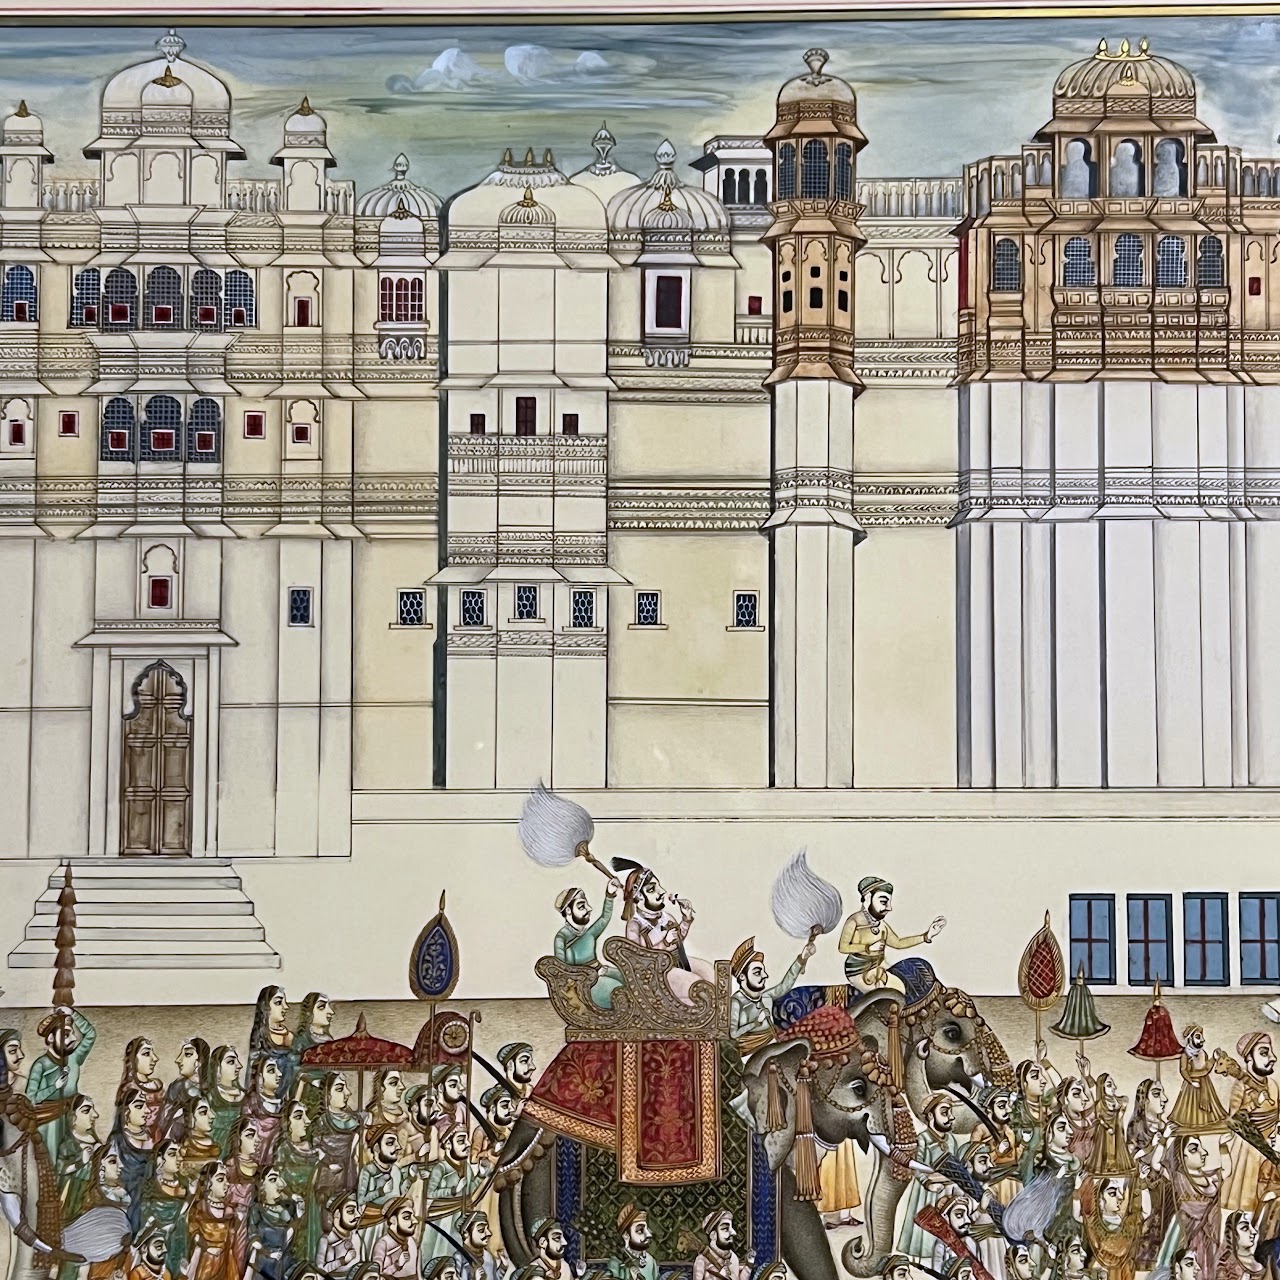 Rajasthani Court Procession at Udaiper Painting